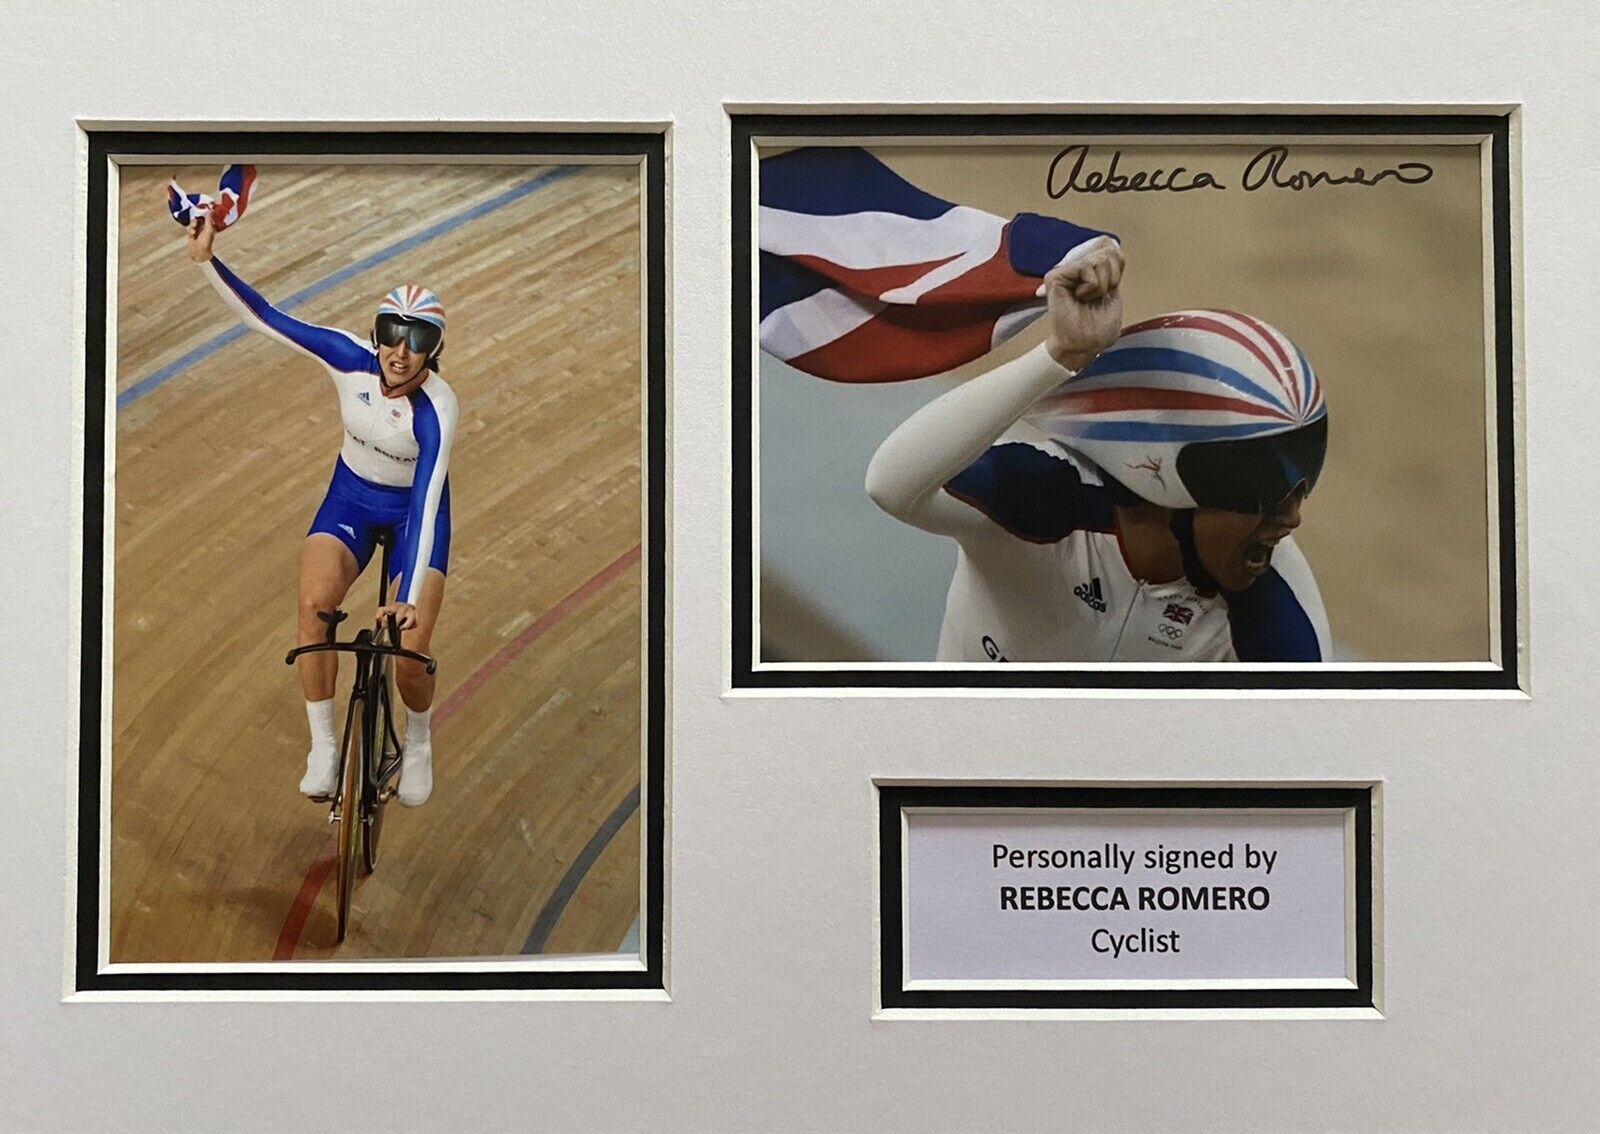 Rebecca Romero Hand Signed Olympics Photo Poster painting In A4 Mount Display - Team GB